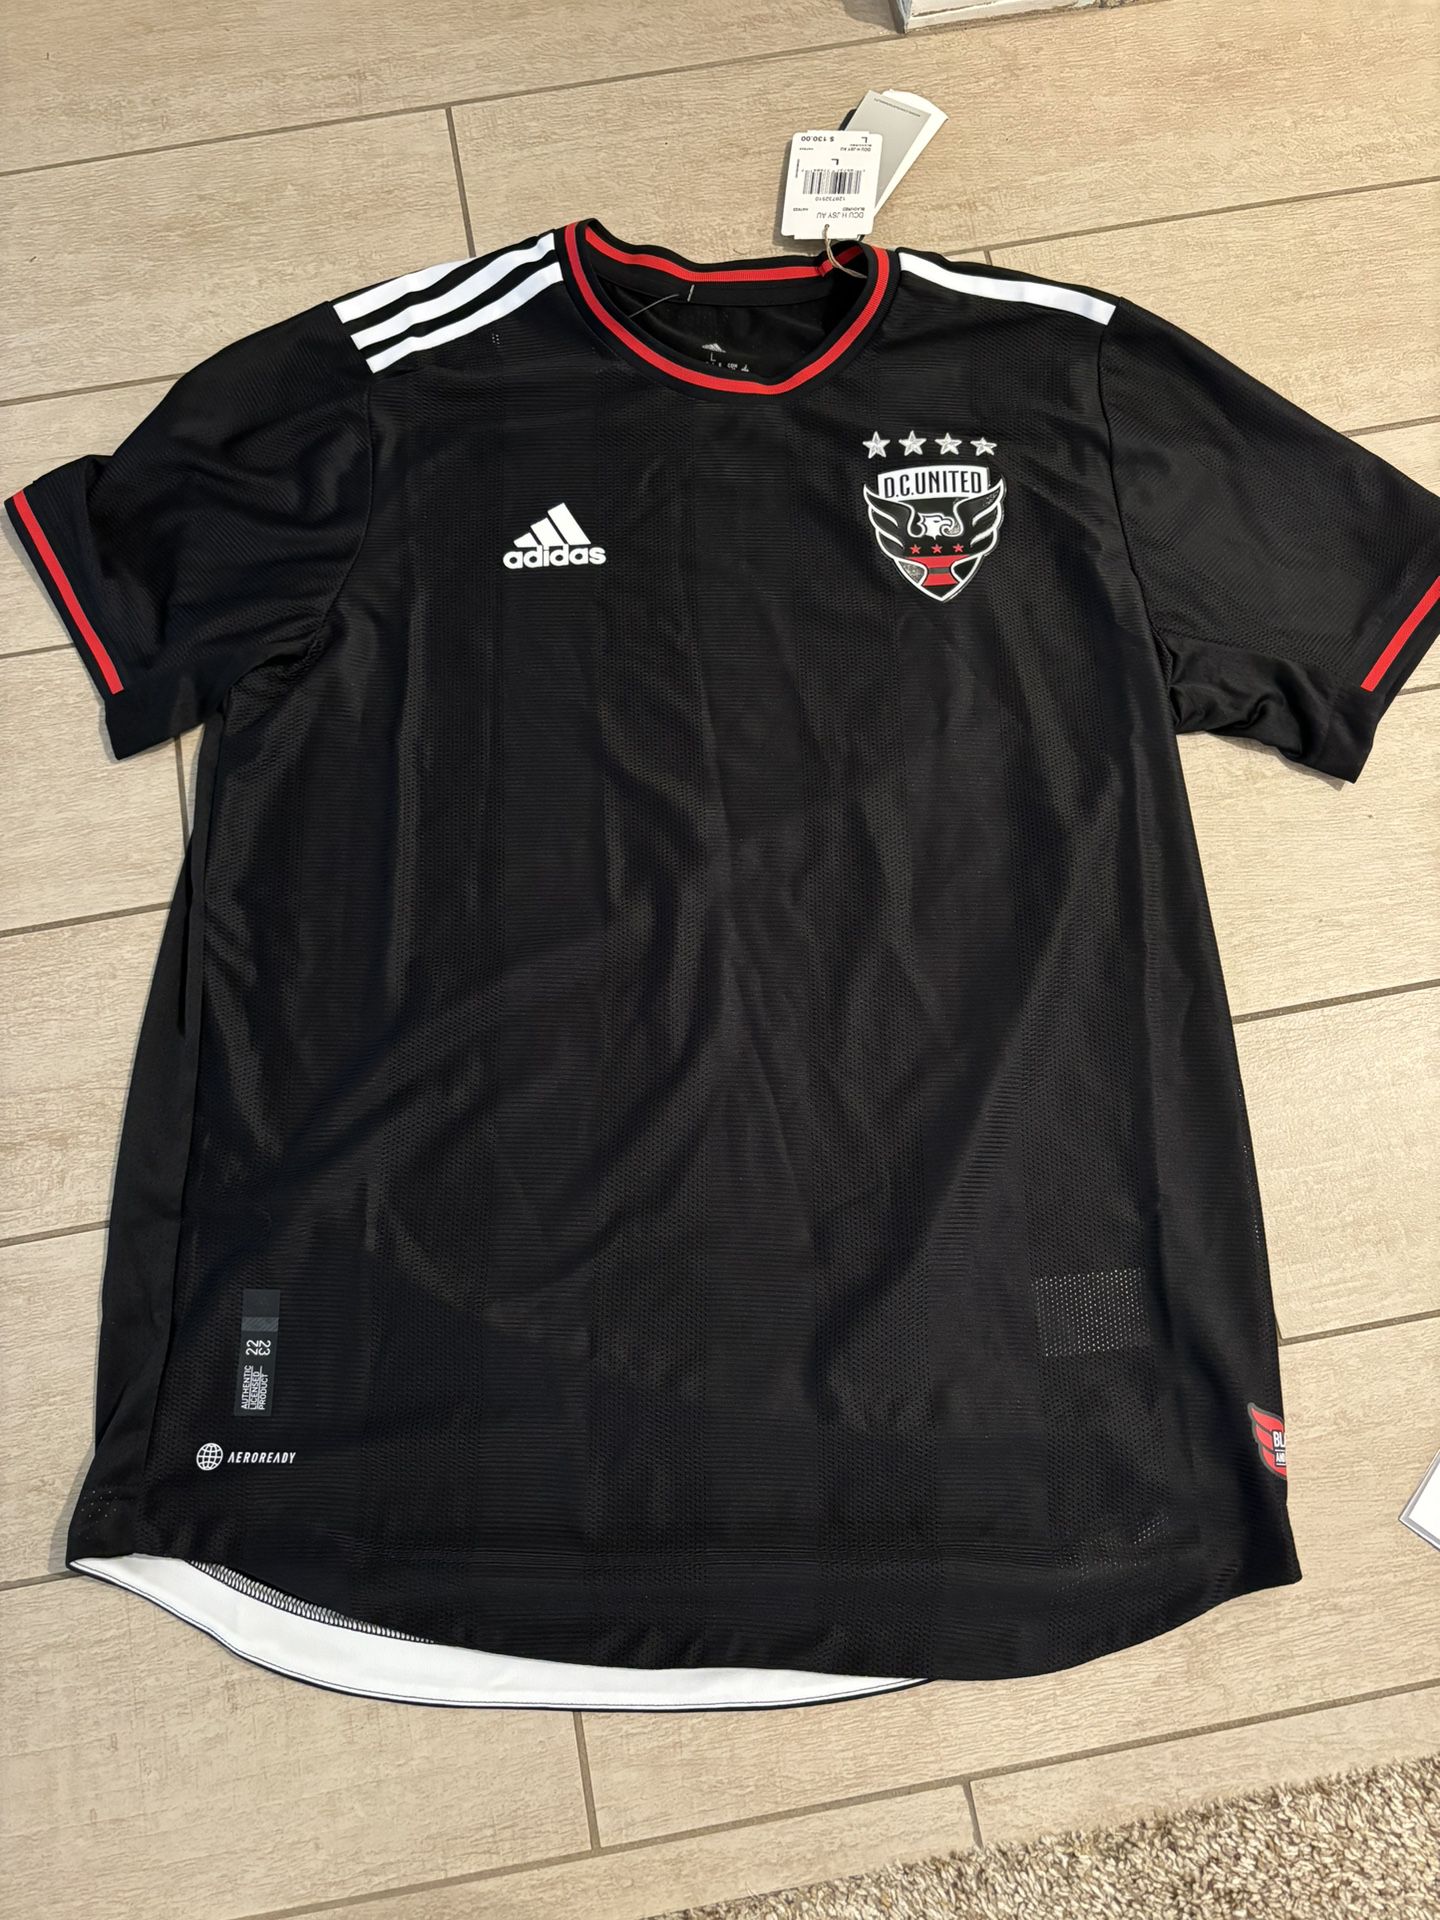 DC United Jersey Size: L - New